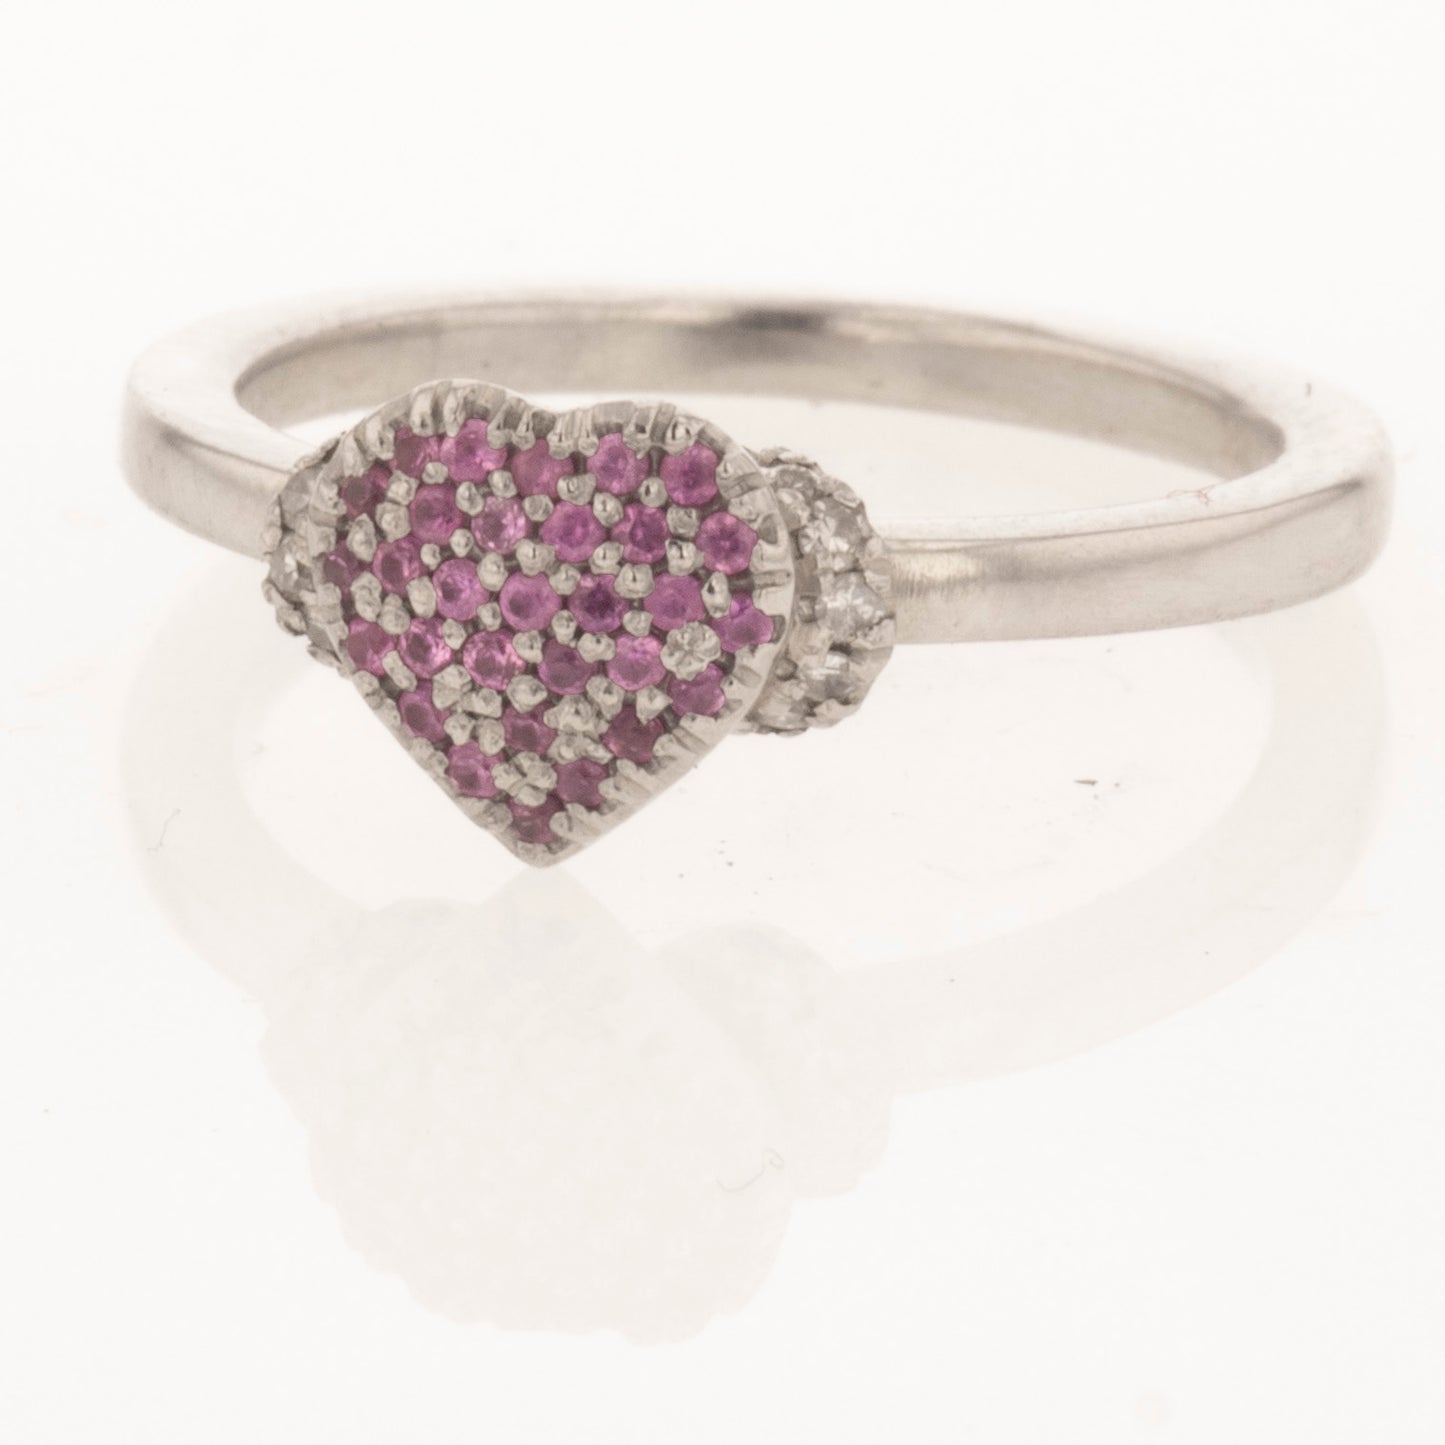  pink sapphires ring